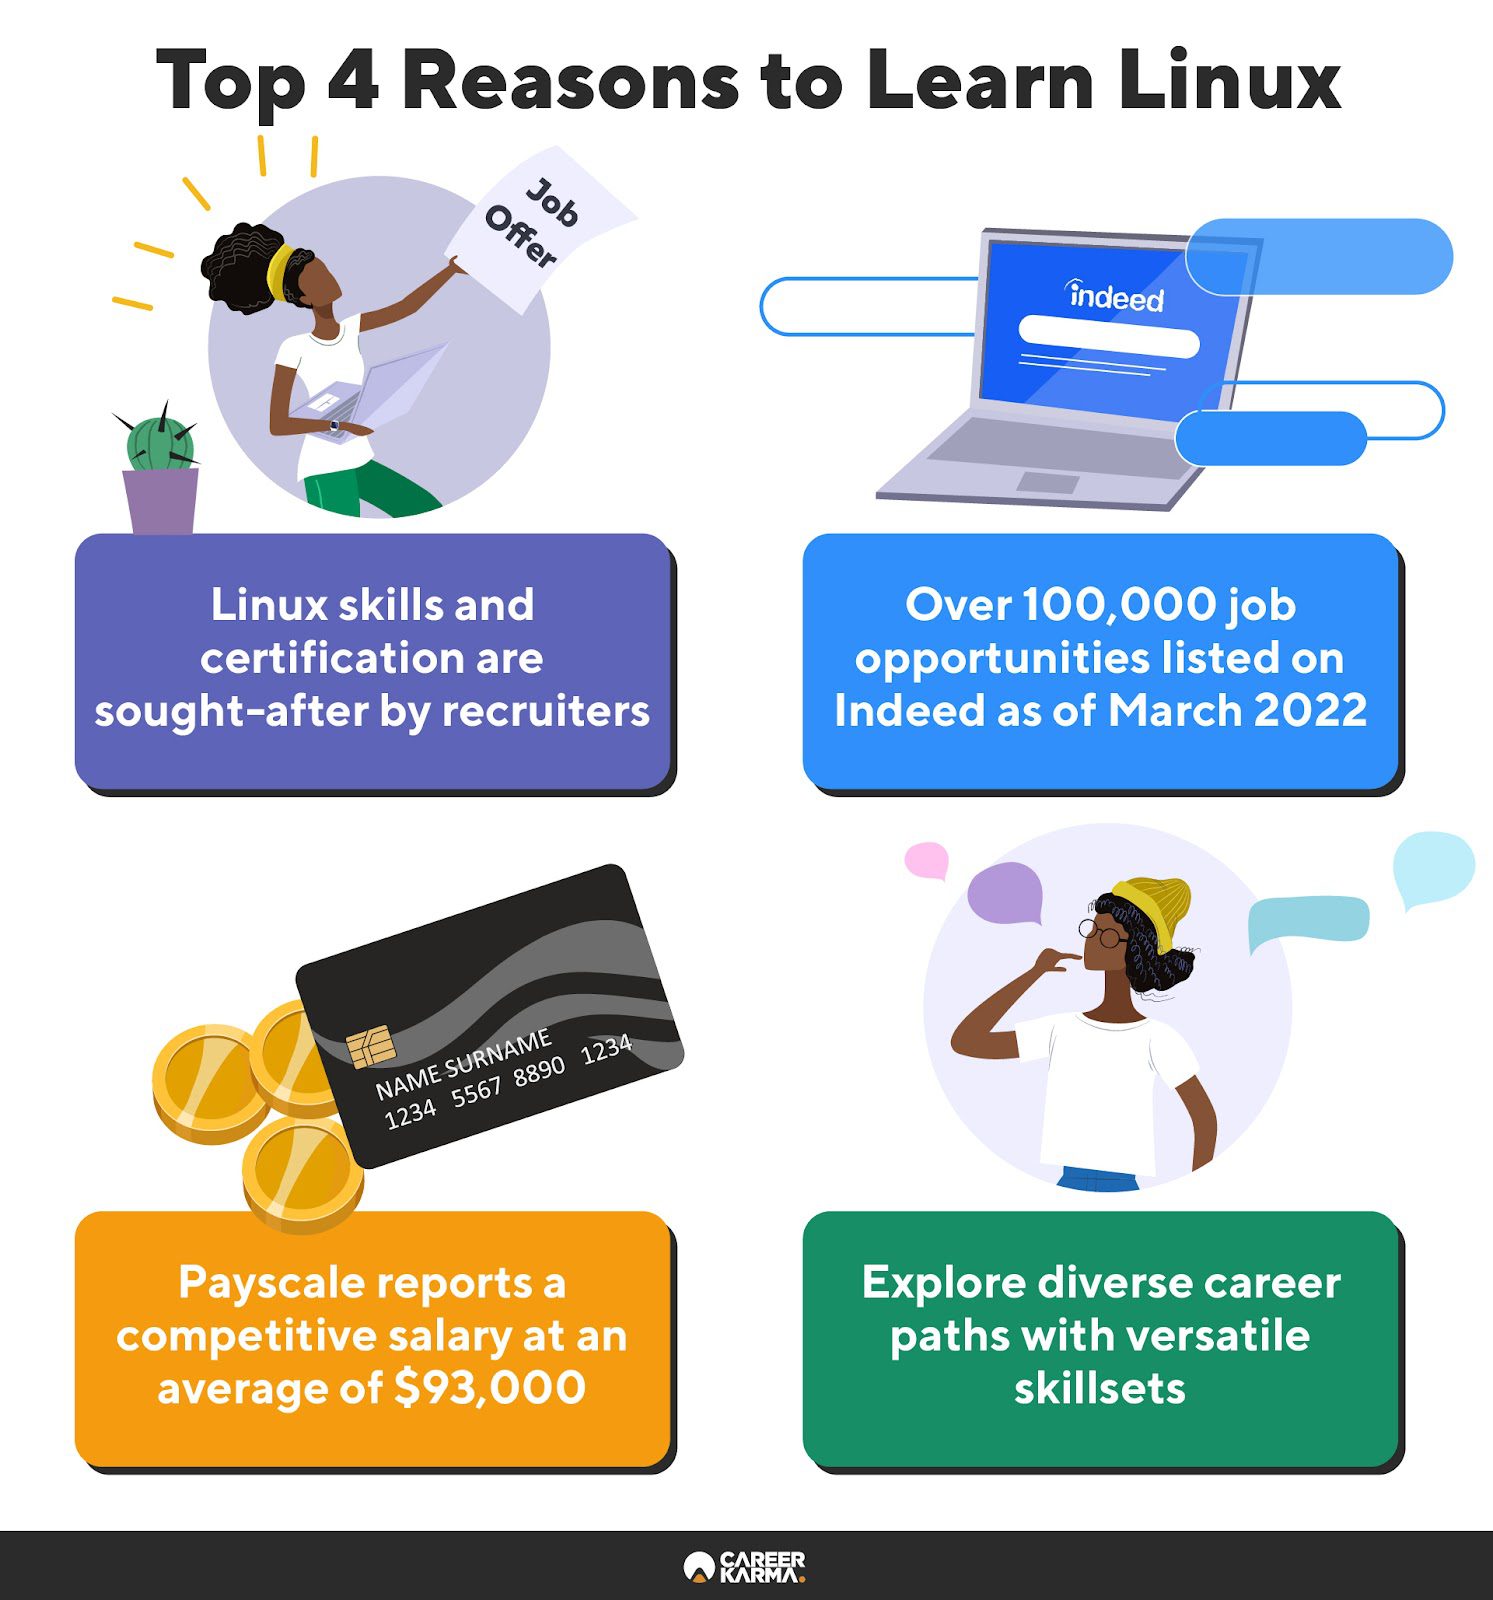 An infographic highlighting the benefits of learning Linux